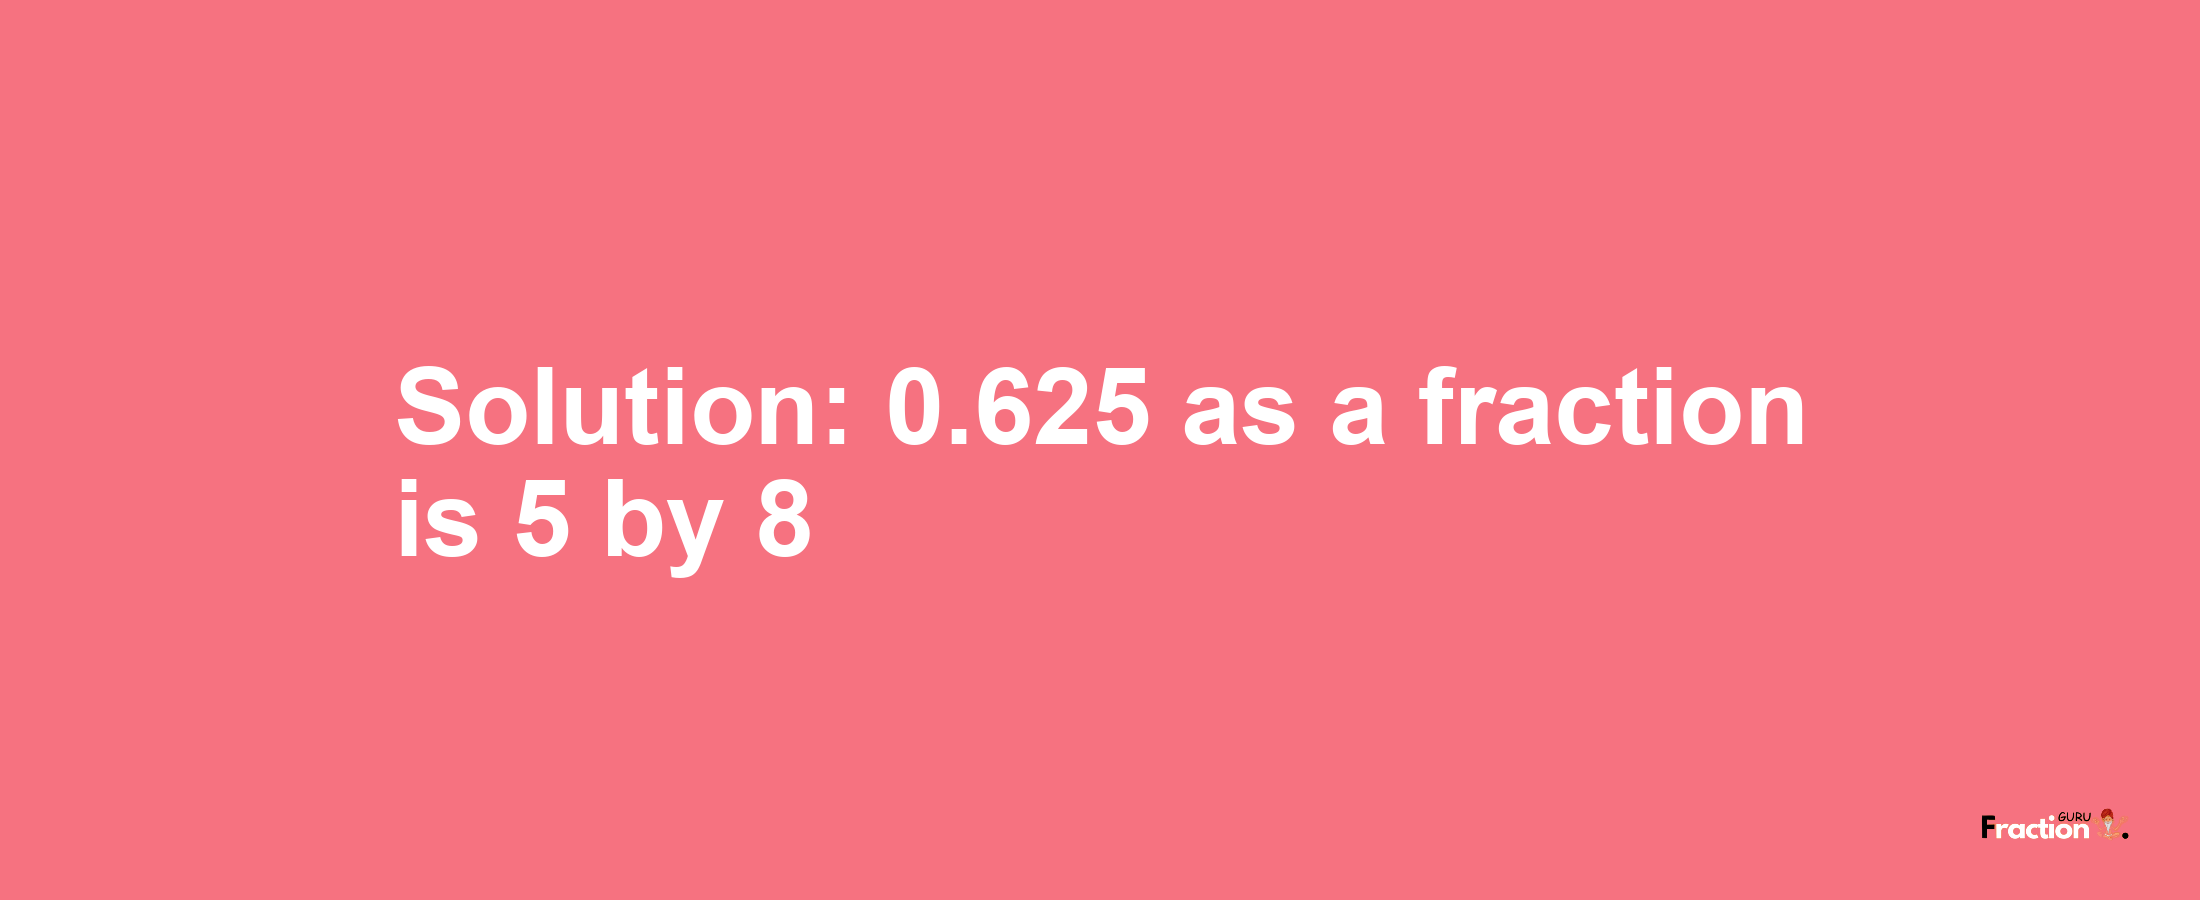 Solution:0.625 as a fraction is 5/8